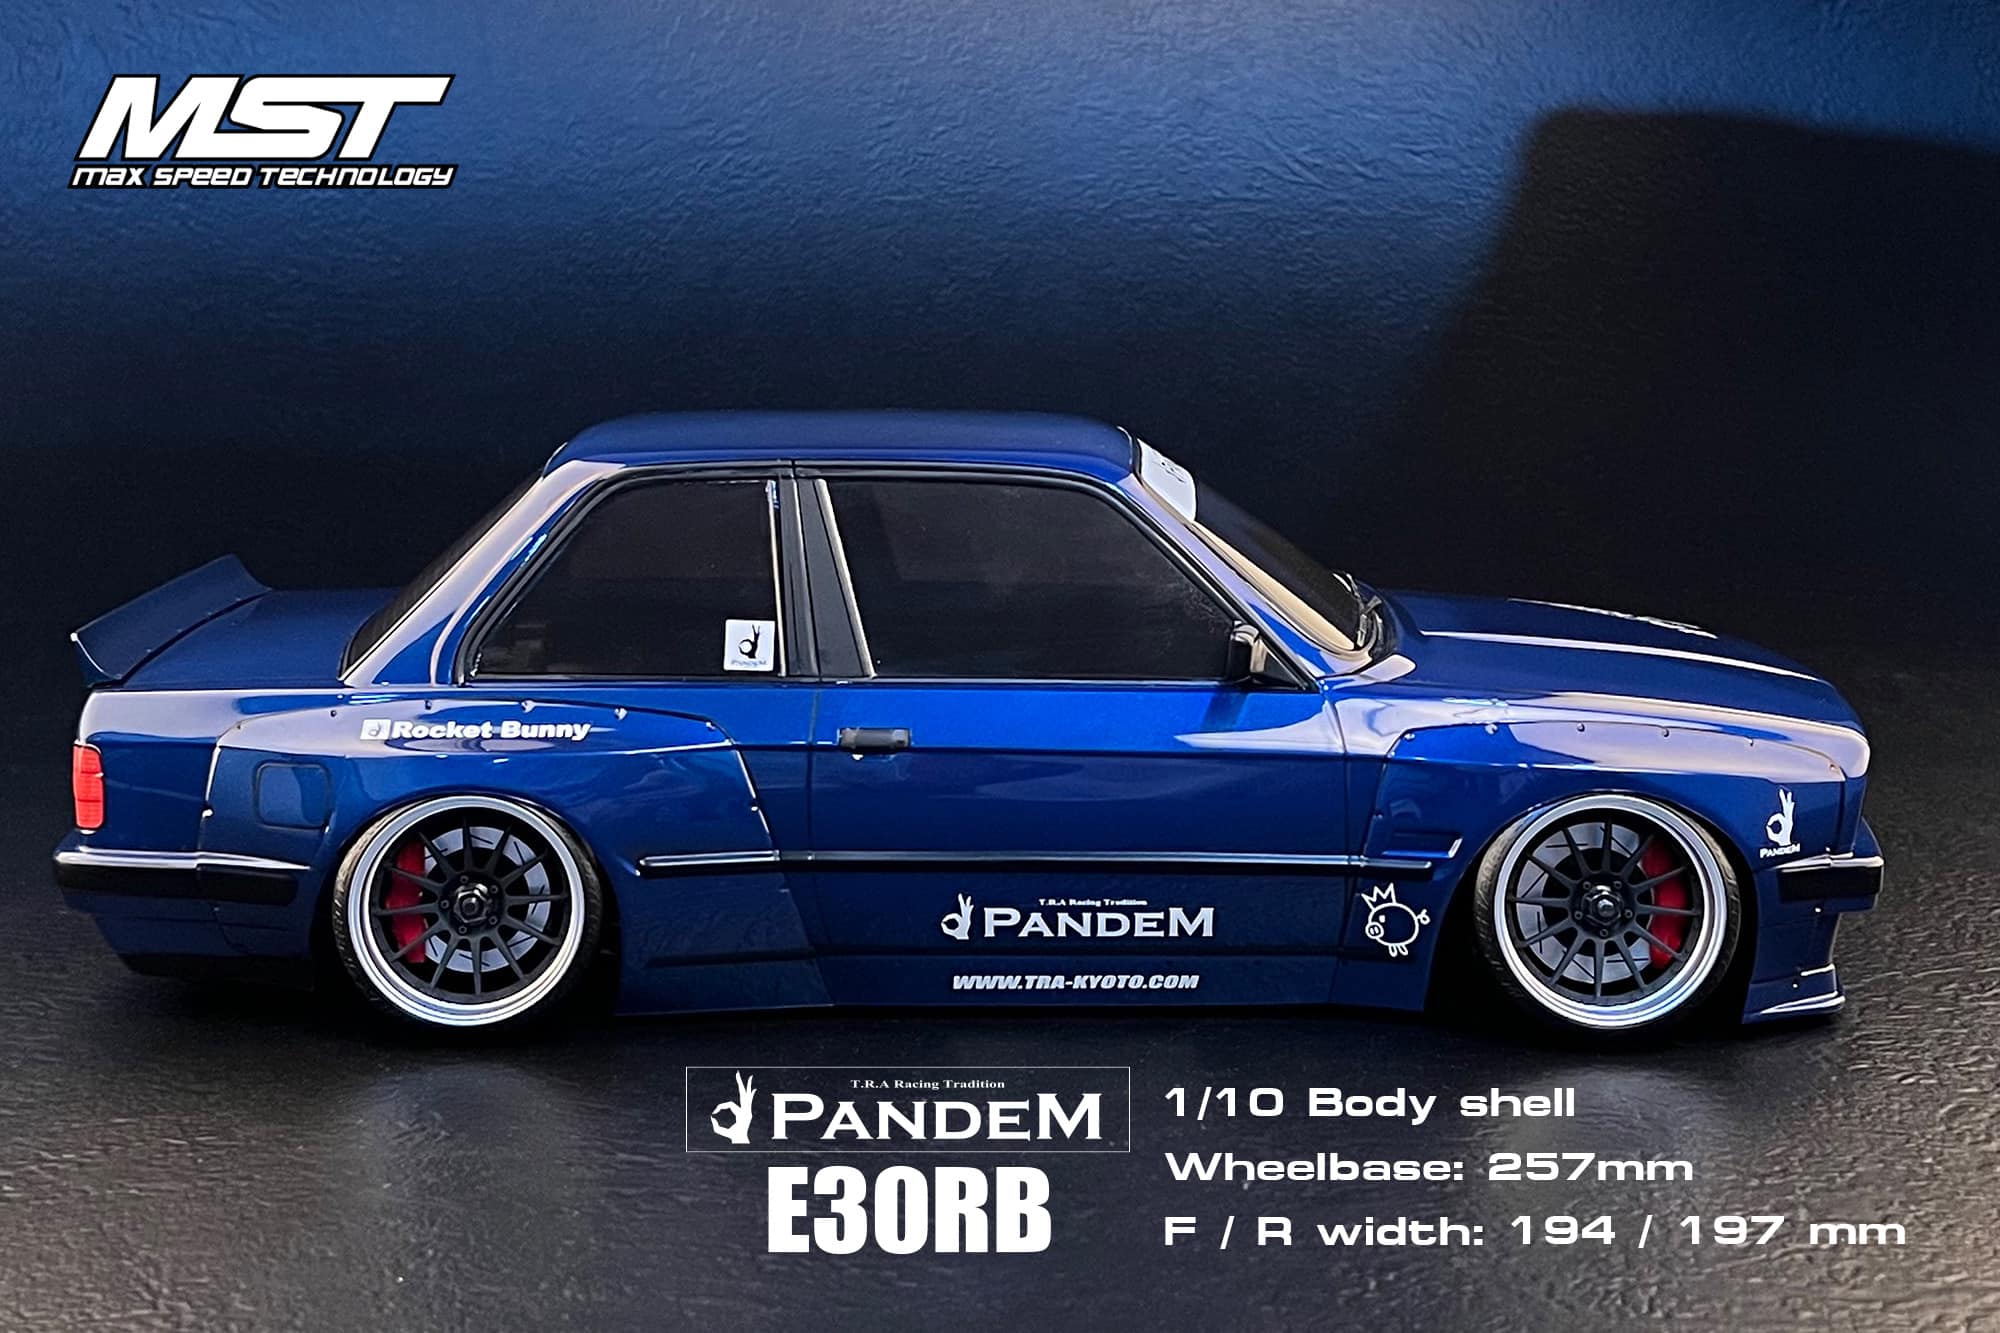 Kayhobbis - Onlineshop for RC Cars - Drift - Crawler - MST E30RB Pandem  body (clear)